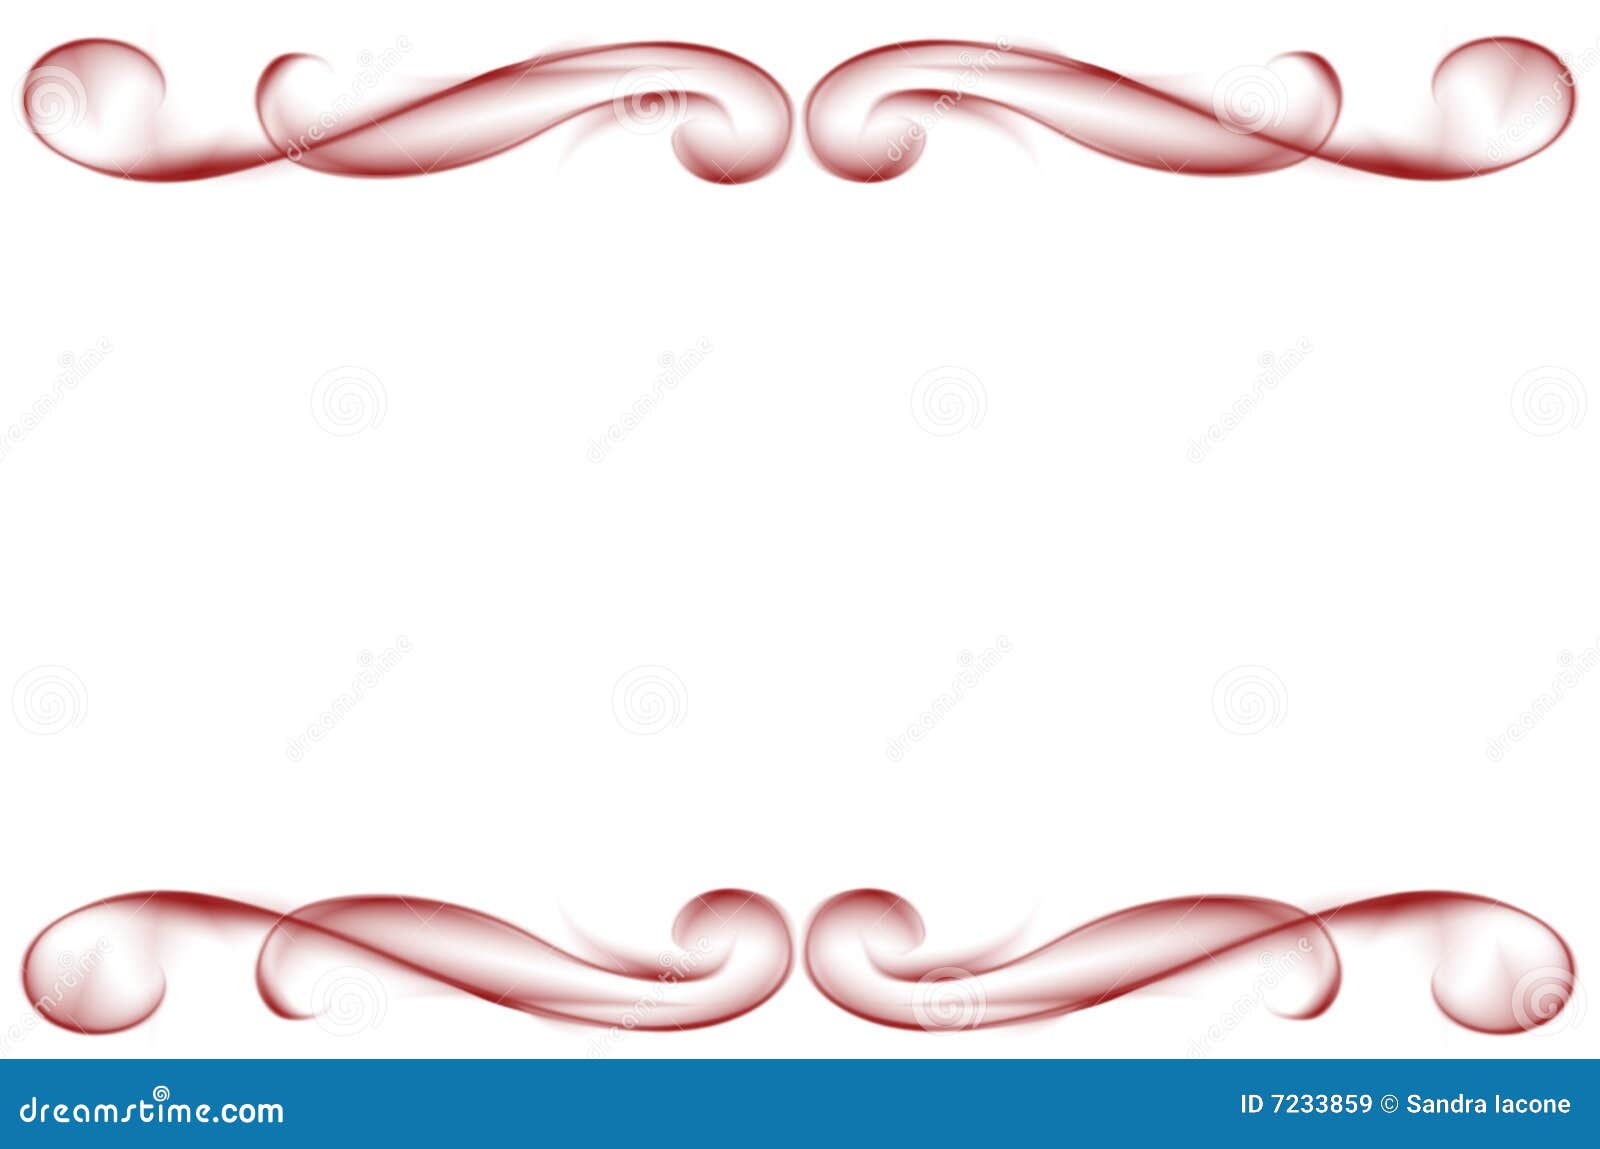 Red Border Royalty Free Stock Images - Image: 7233859